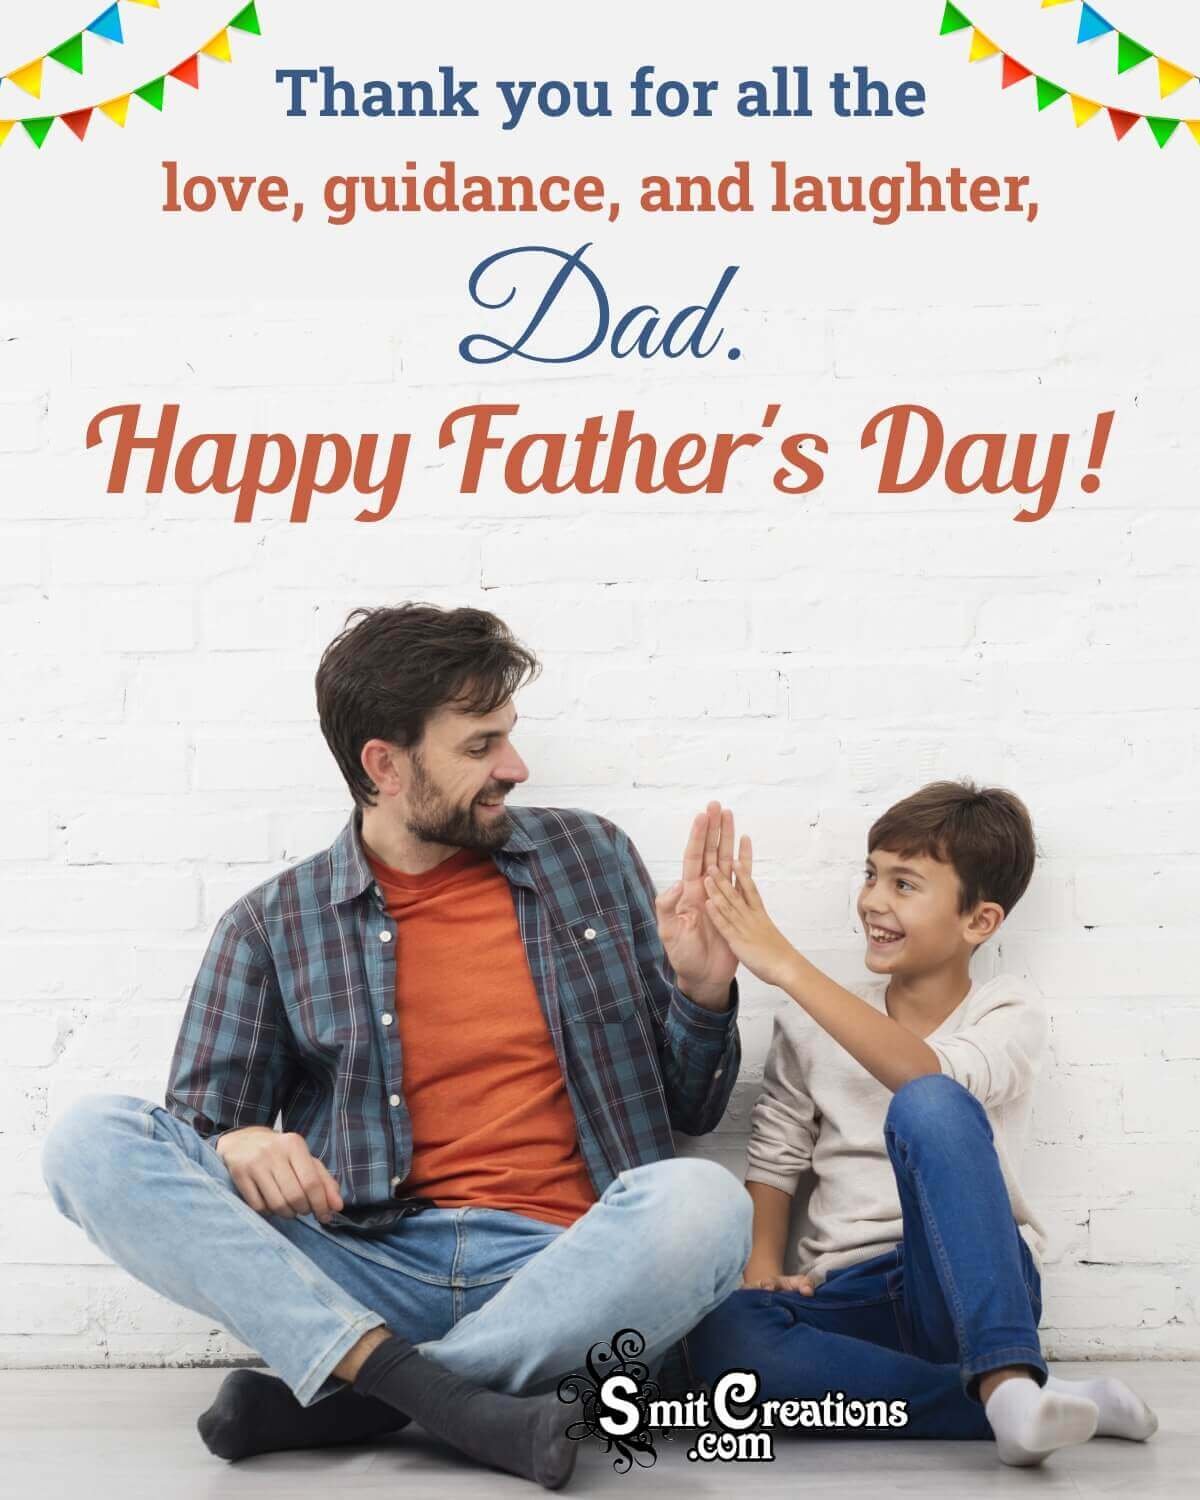 Happy Father’s Day Lovely Wish Image